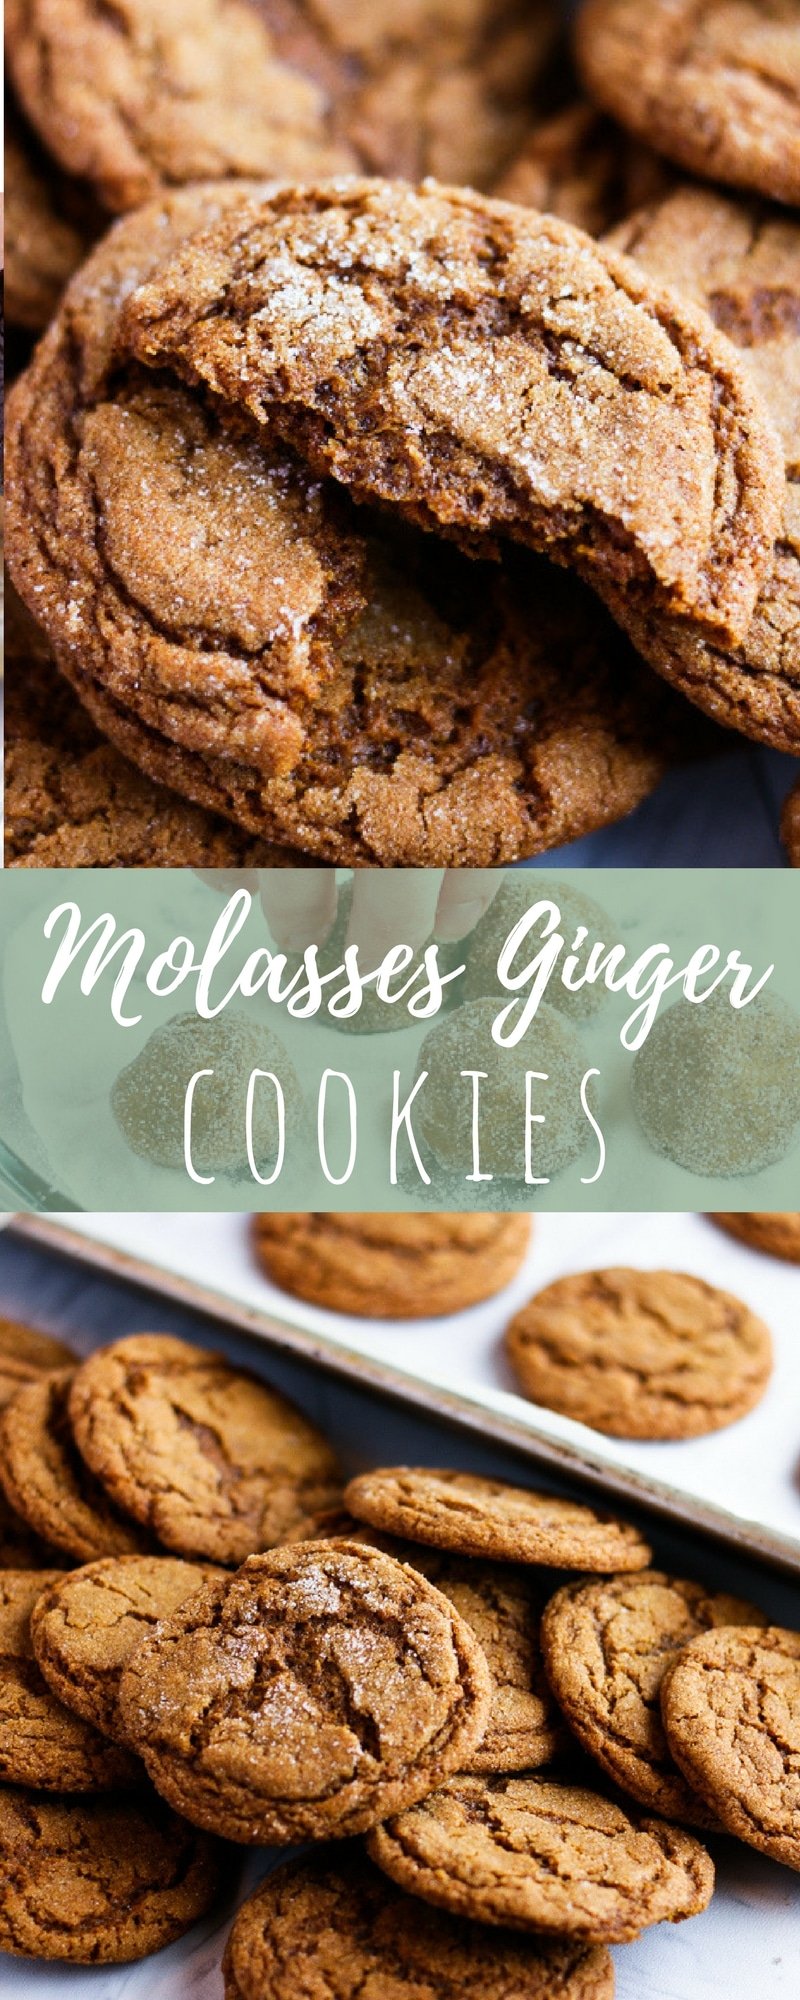 Molasses ginger cookies are deliciously chewy and packed with holiday-spice flavor. Making homemade Christmas cookies has never been easier - or more tasty!